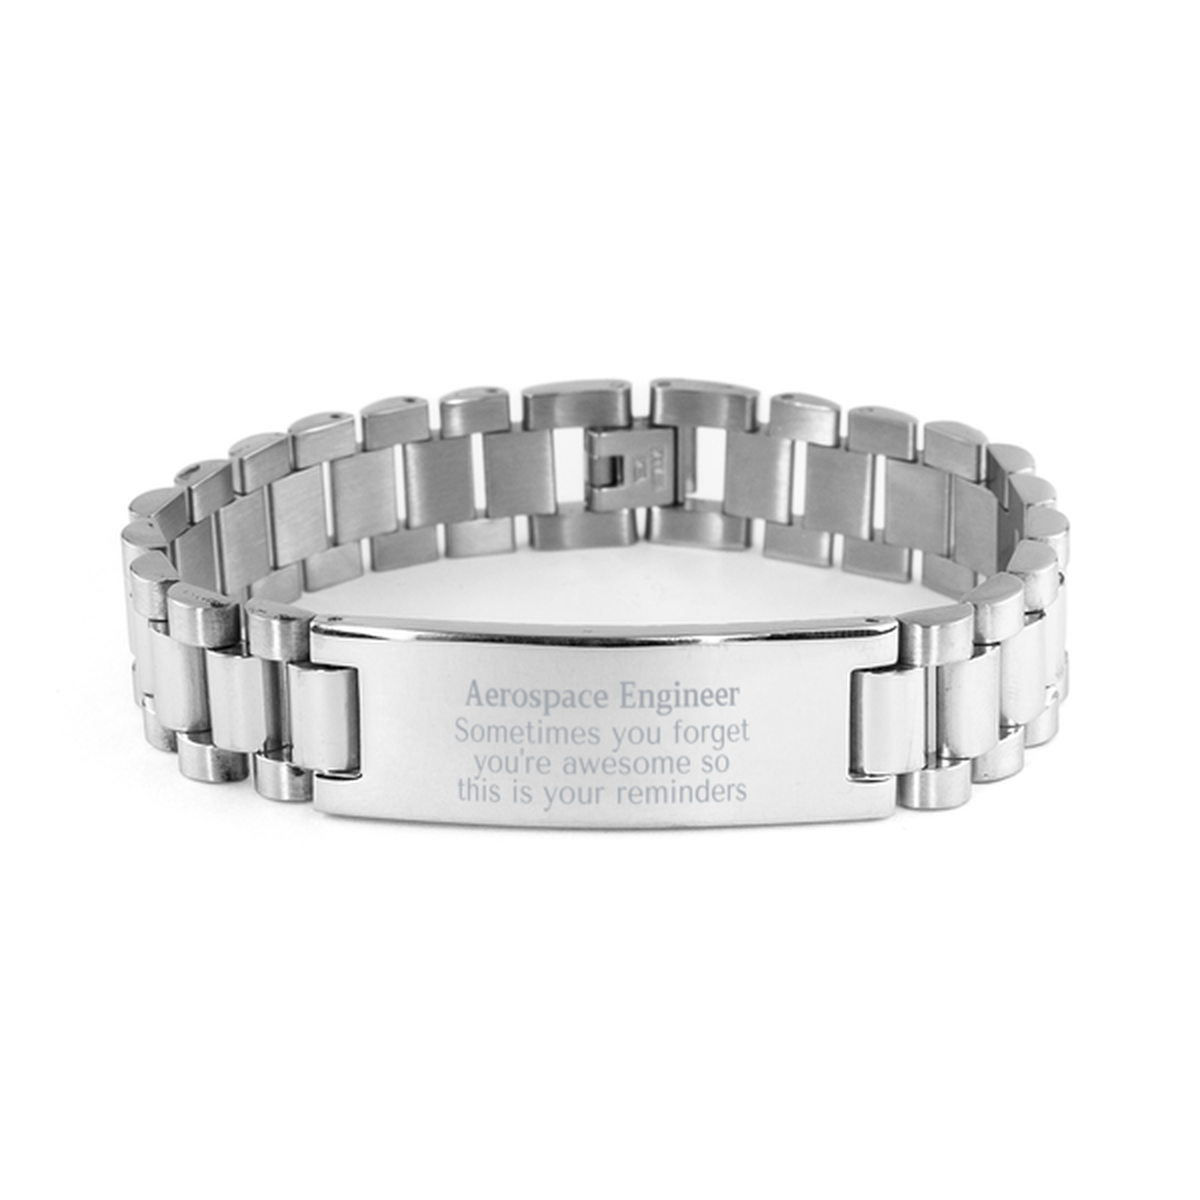 Sentimental Aerospace Engineer Ladder Stainless Steel Bracelet, Aerospace Engineer Sometimes you forget you're awesome so this is your reminders, Graduation Christmas Birthday Gifts for Aerospace Engineer, Men, Women, Coworkers